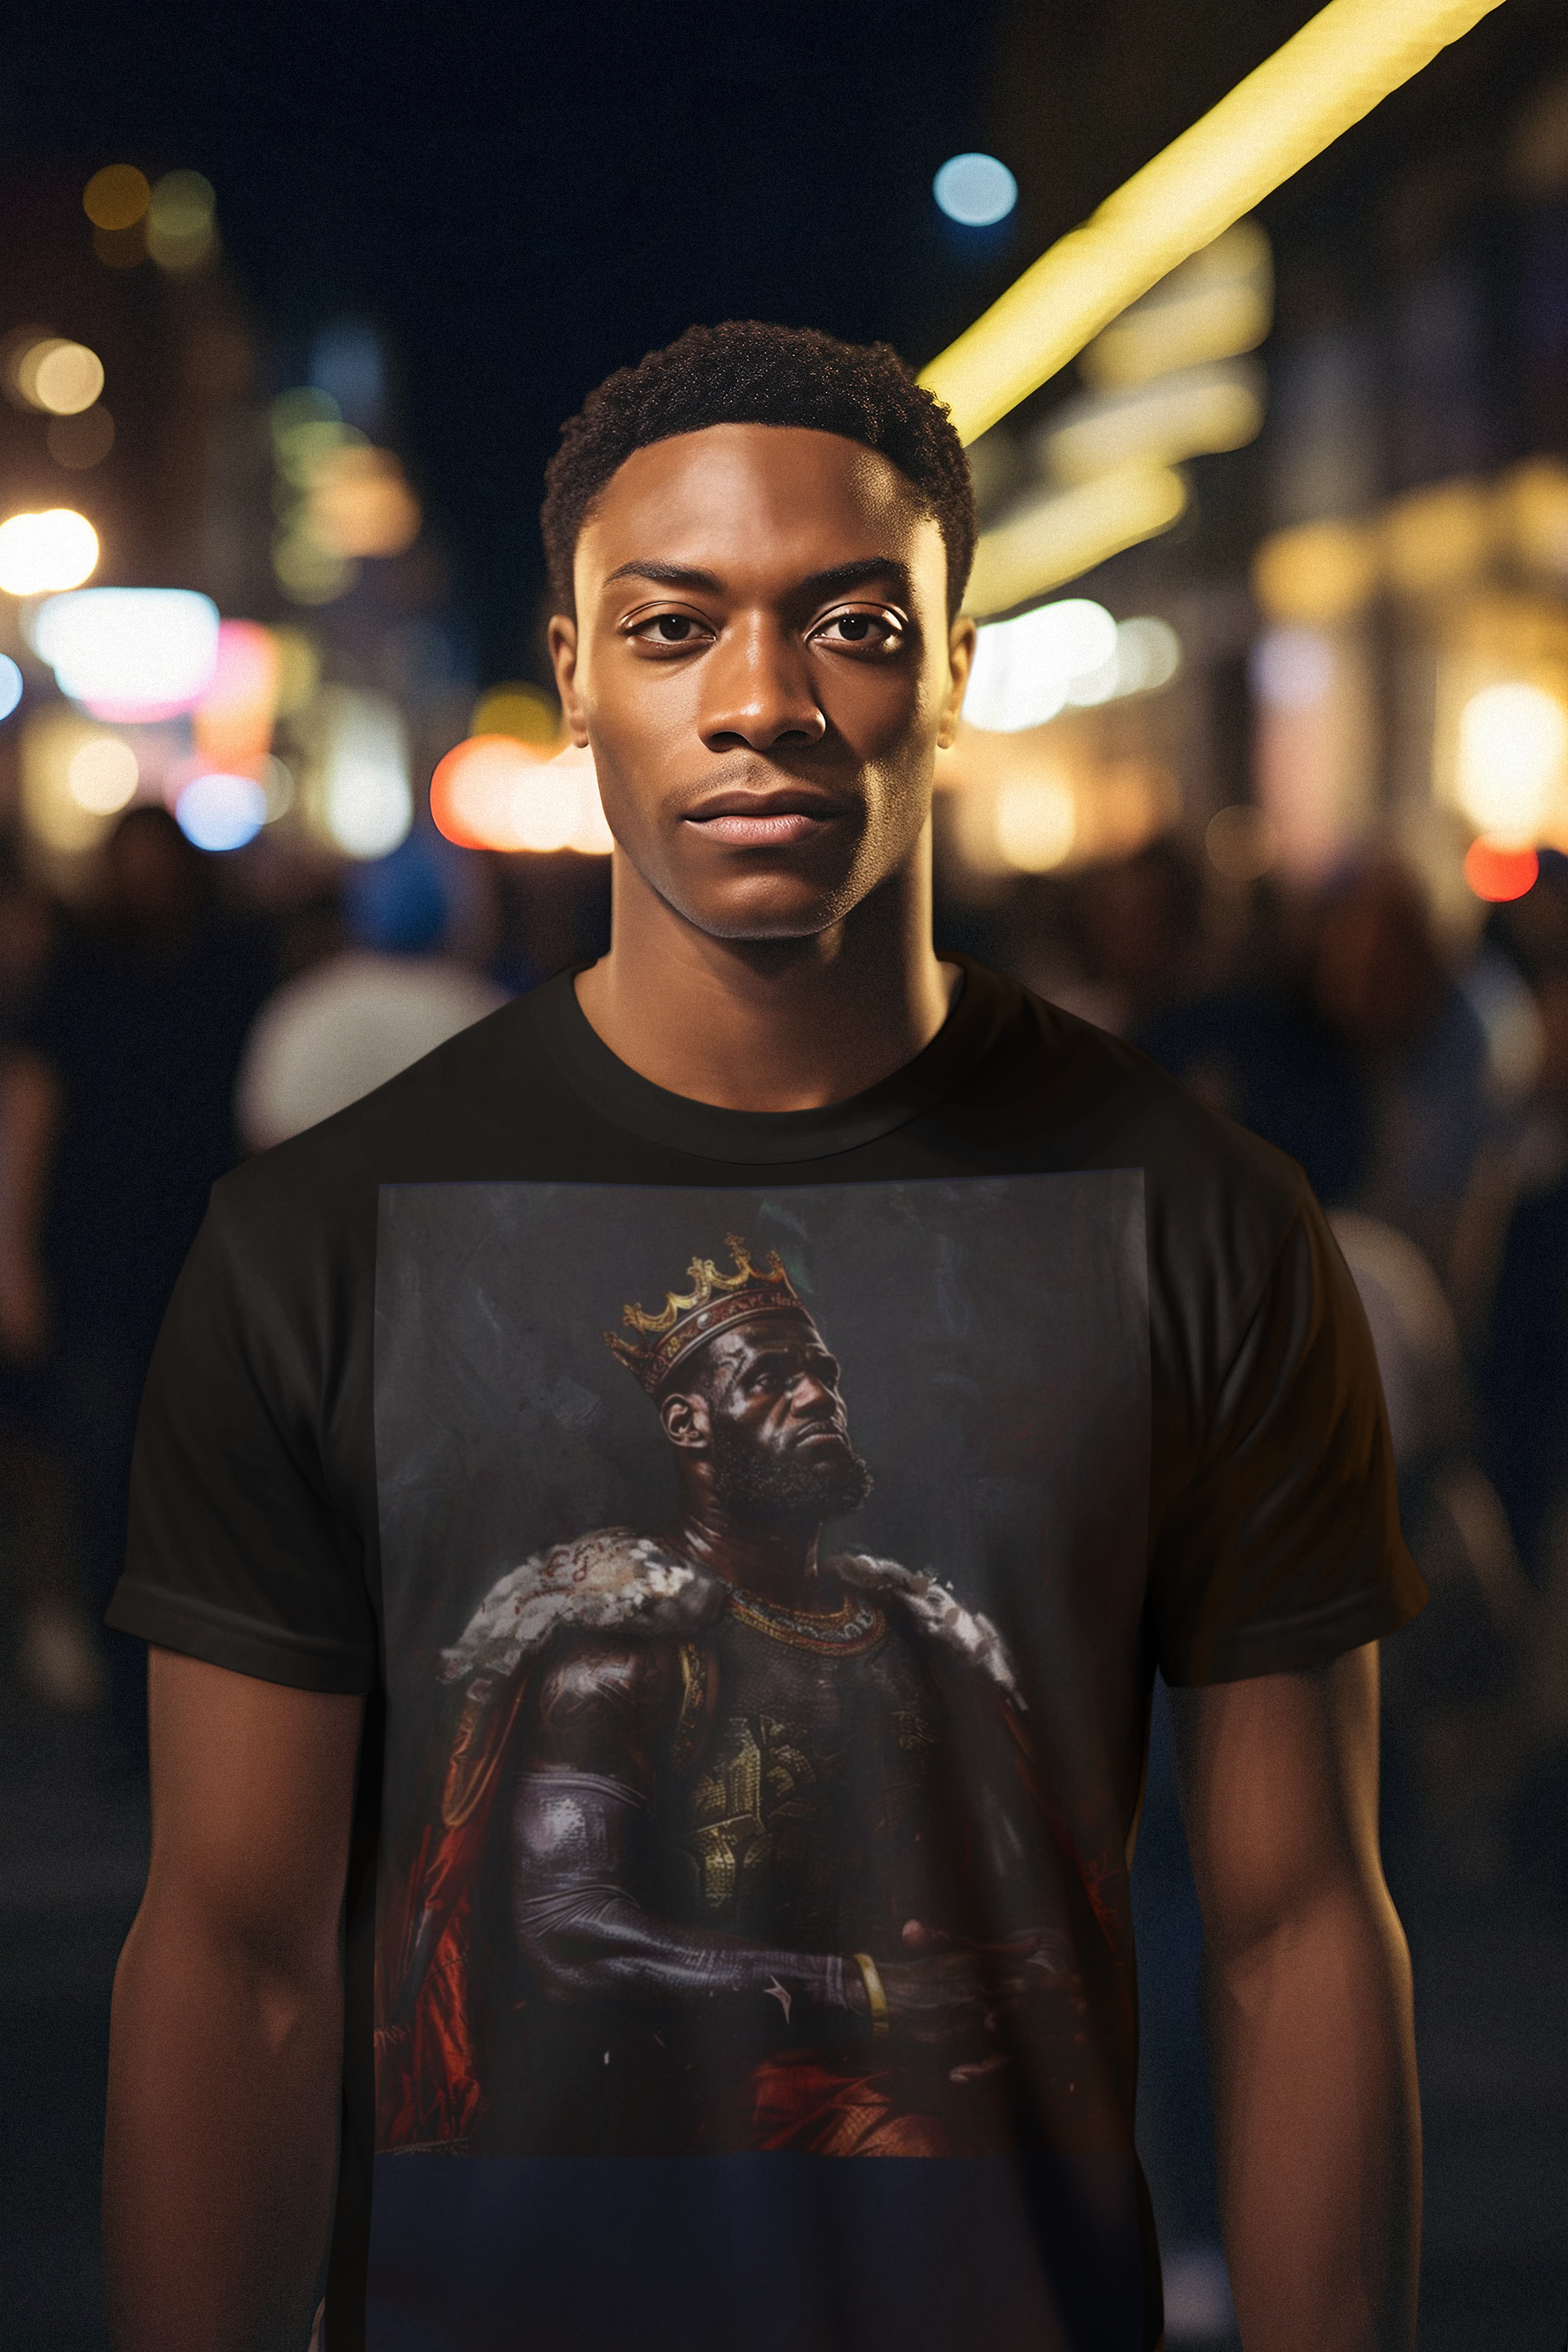 The image showcases the sophisticated unisex softstyle t-shirt, featuring a detailed and artistically rendered portrait of King James in the style of a Renaissance painting. The quality of the softstyle material is evident, promising comfort and durability, while the design speaks to the blend of sports legacy and classical elegance. Inspired by Lebron James